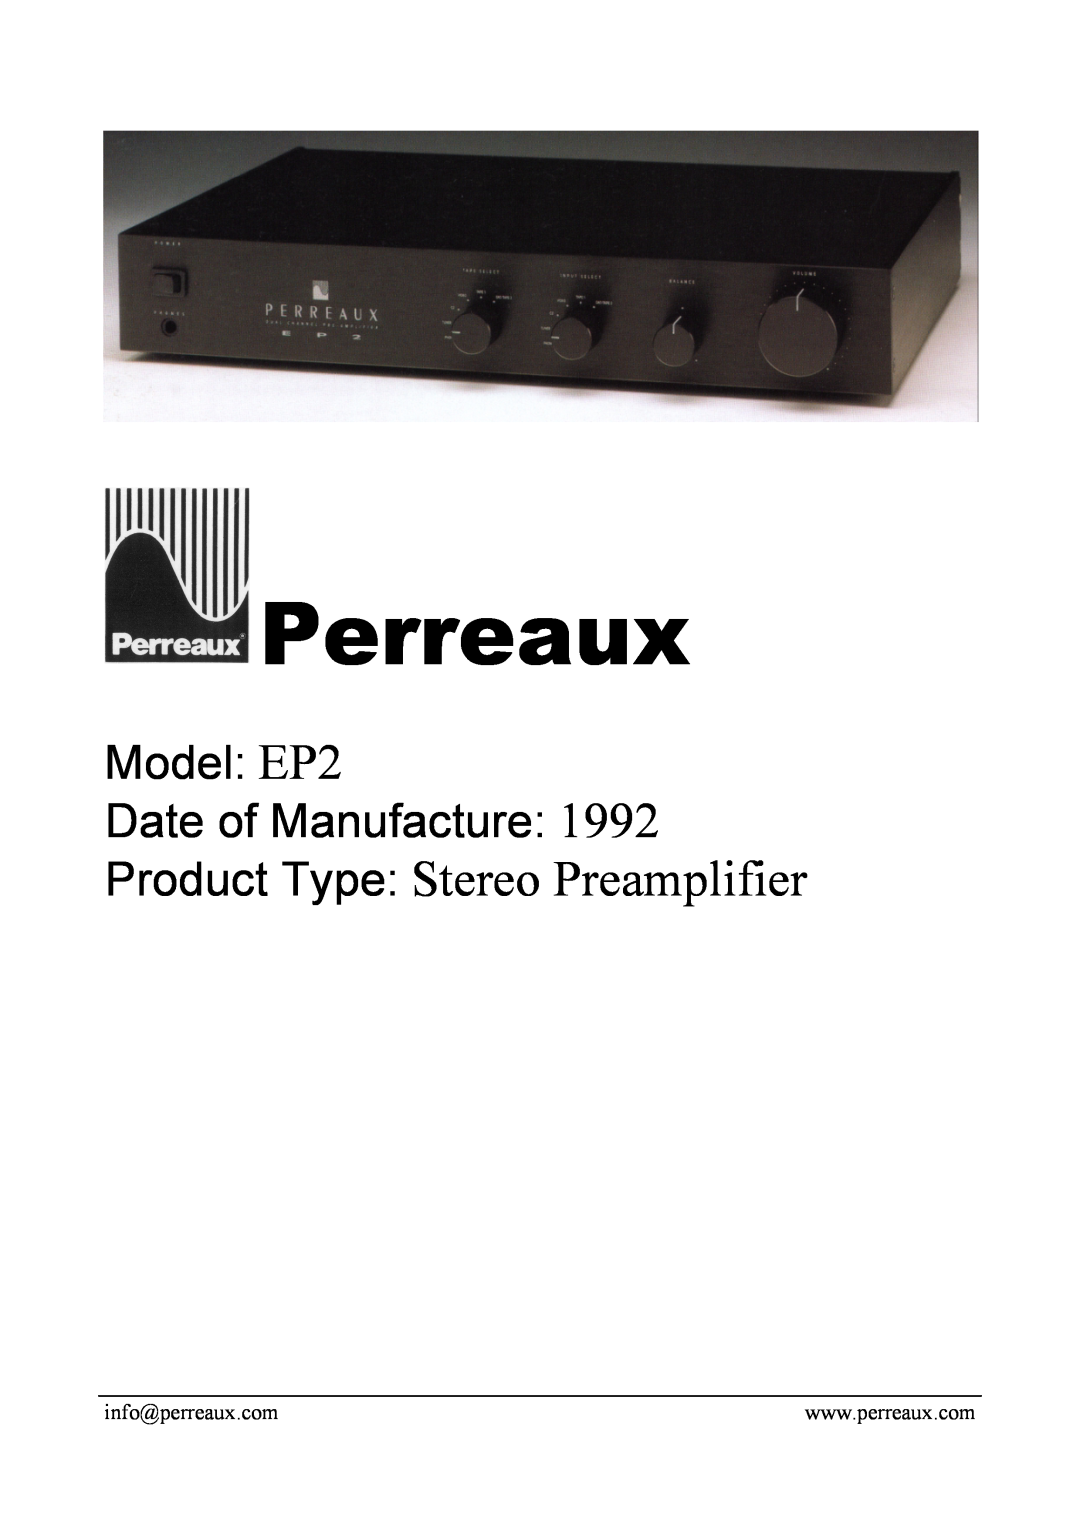 Perreaux manual Perreaux, Product Type Stereo Preamplifier, Model EP2 Date of Manufacture 